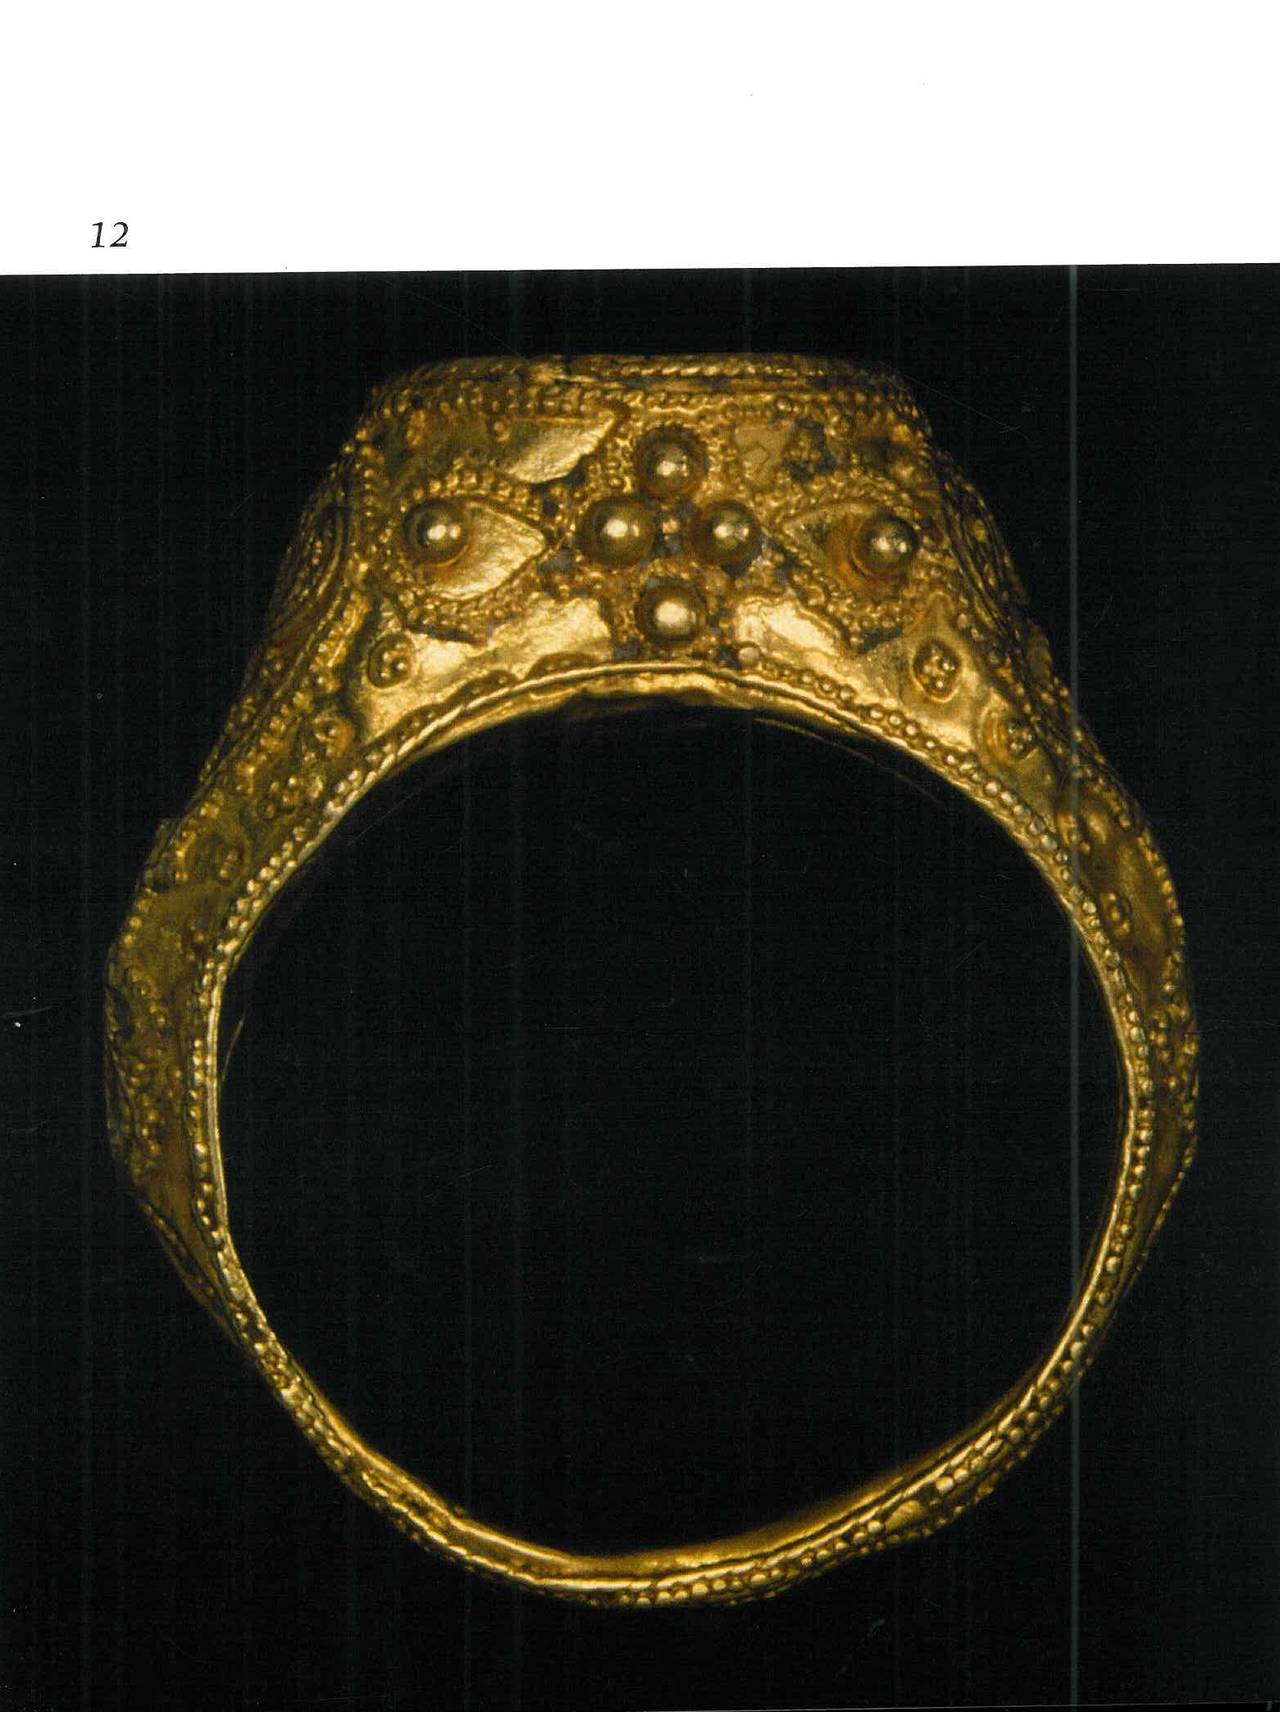 This book is a catalogue of Benjamin Zucker's collection of Islamic rings and inscribed gems which offers a comprehensive chronological listing of 102 finger rings. With over 200 colour and 400 black & white illustrations showing two or three